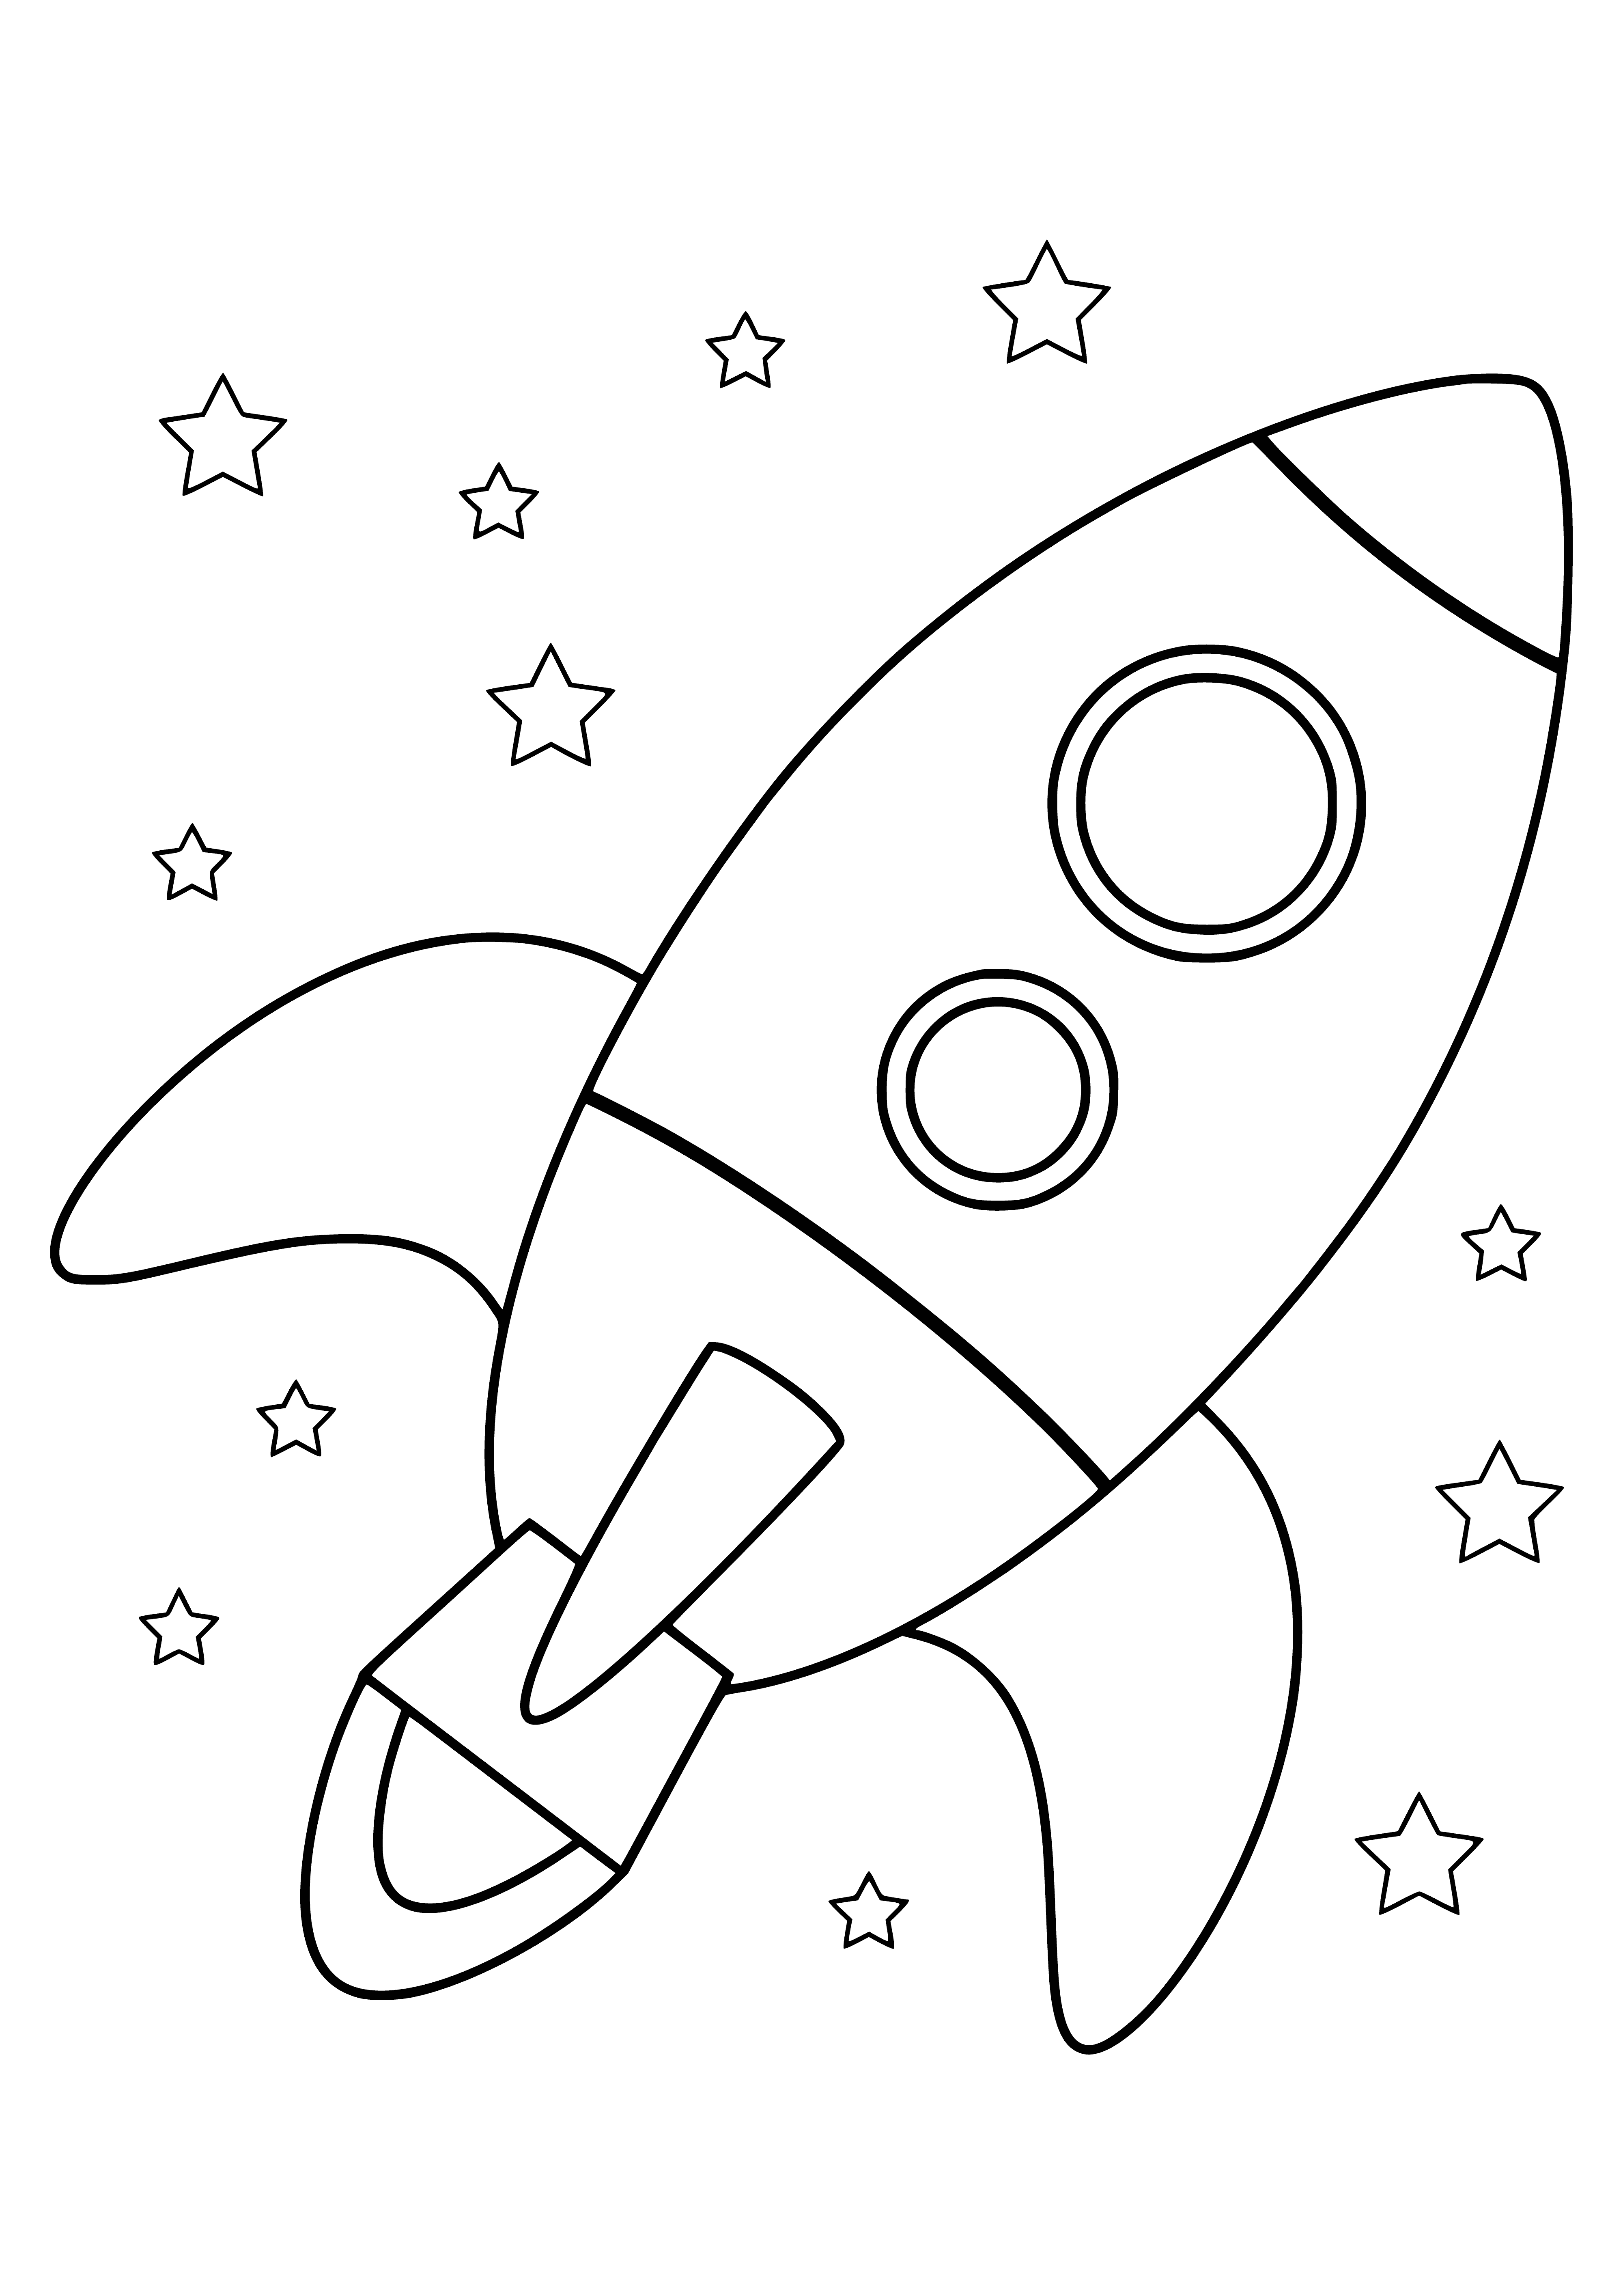 coloring page: Kids aged 4+ can color a rocket blasting off from a planet with a flag and stars in background.